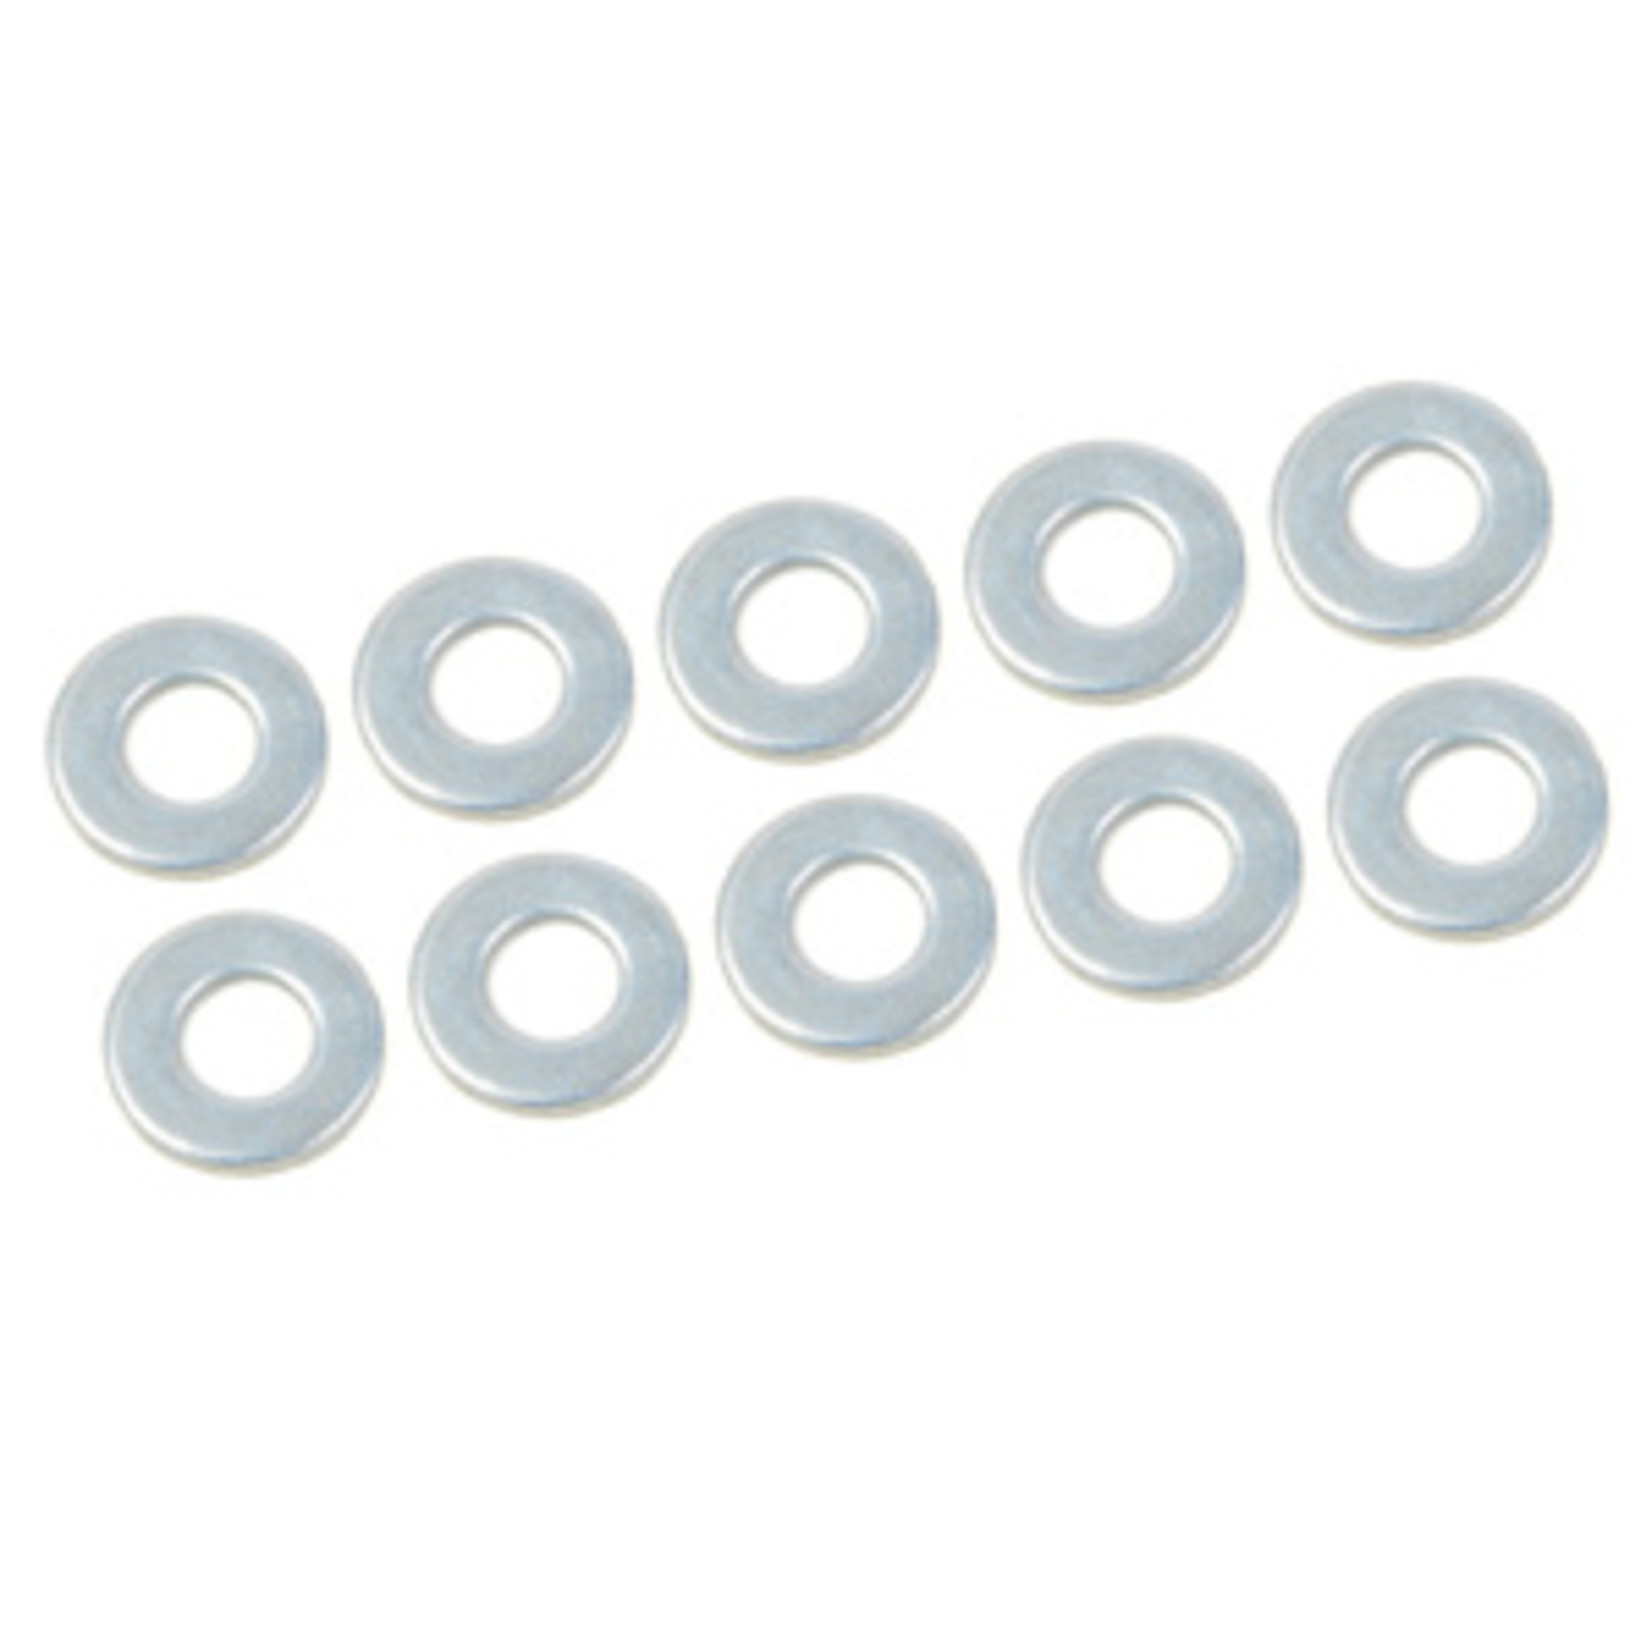 Corally (Team Corally) COR00180-190   Shock Washer - 2.5x6x0.5mm - Steel - 10 pcs: Dementor,